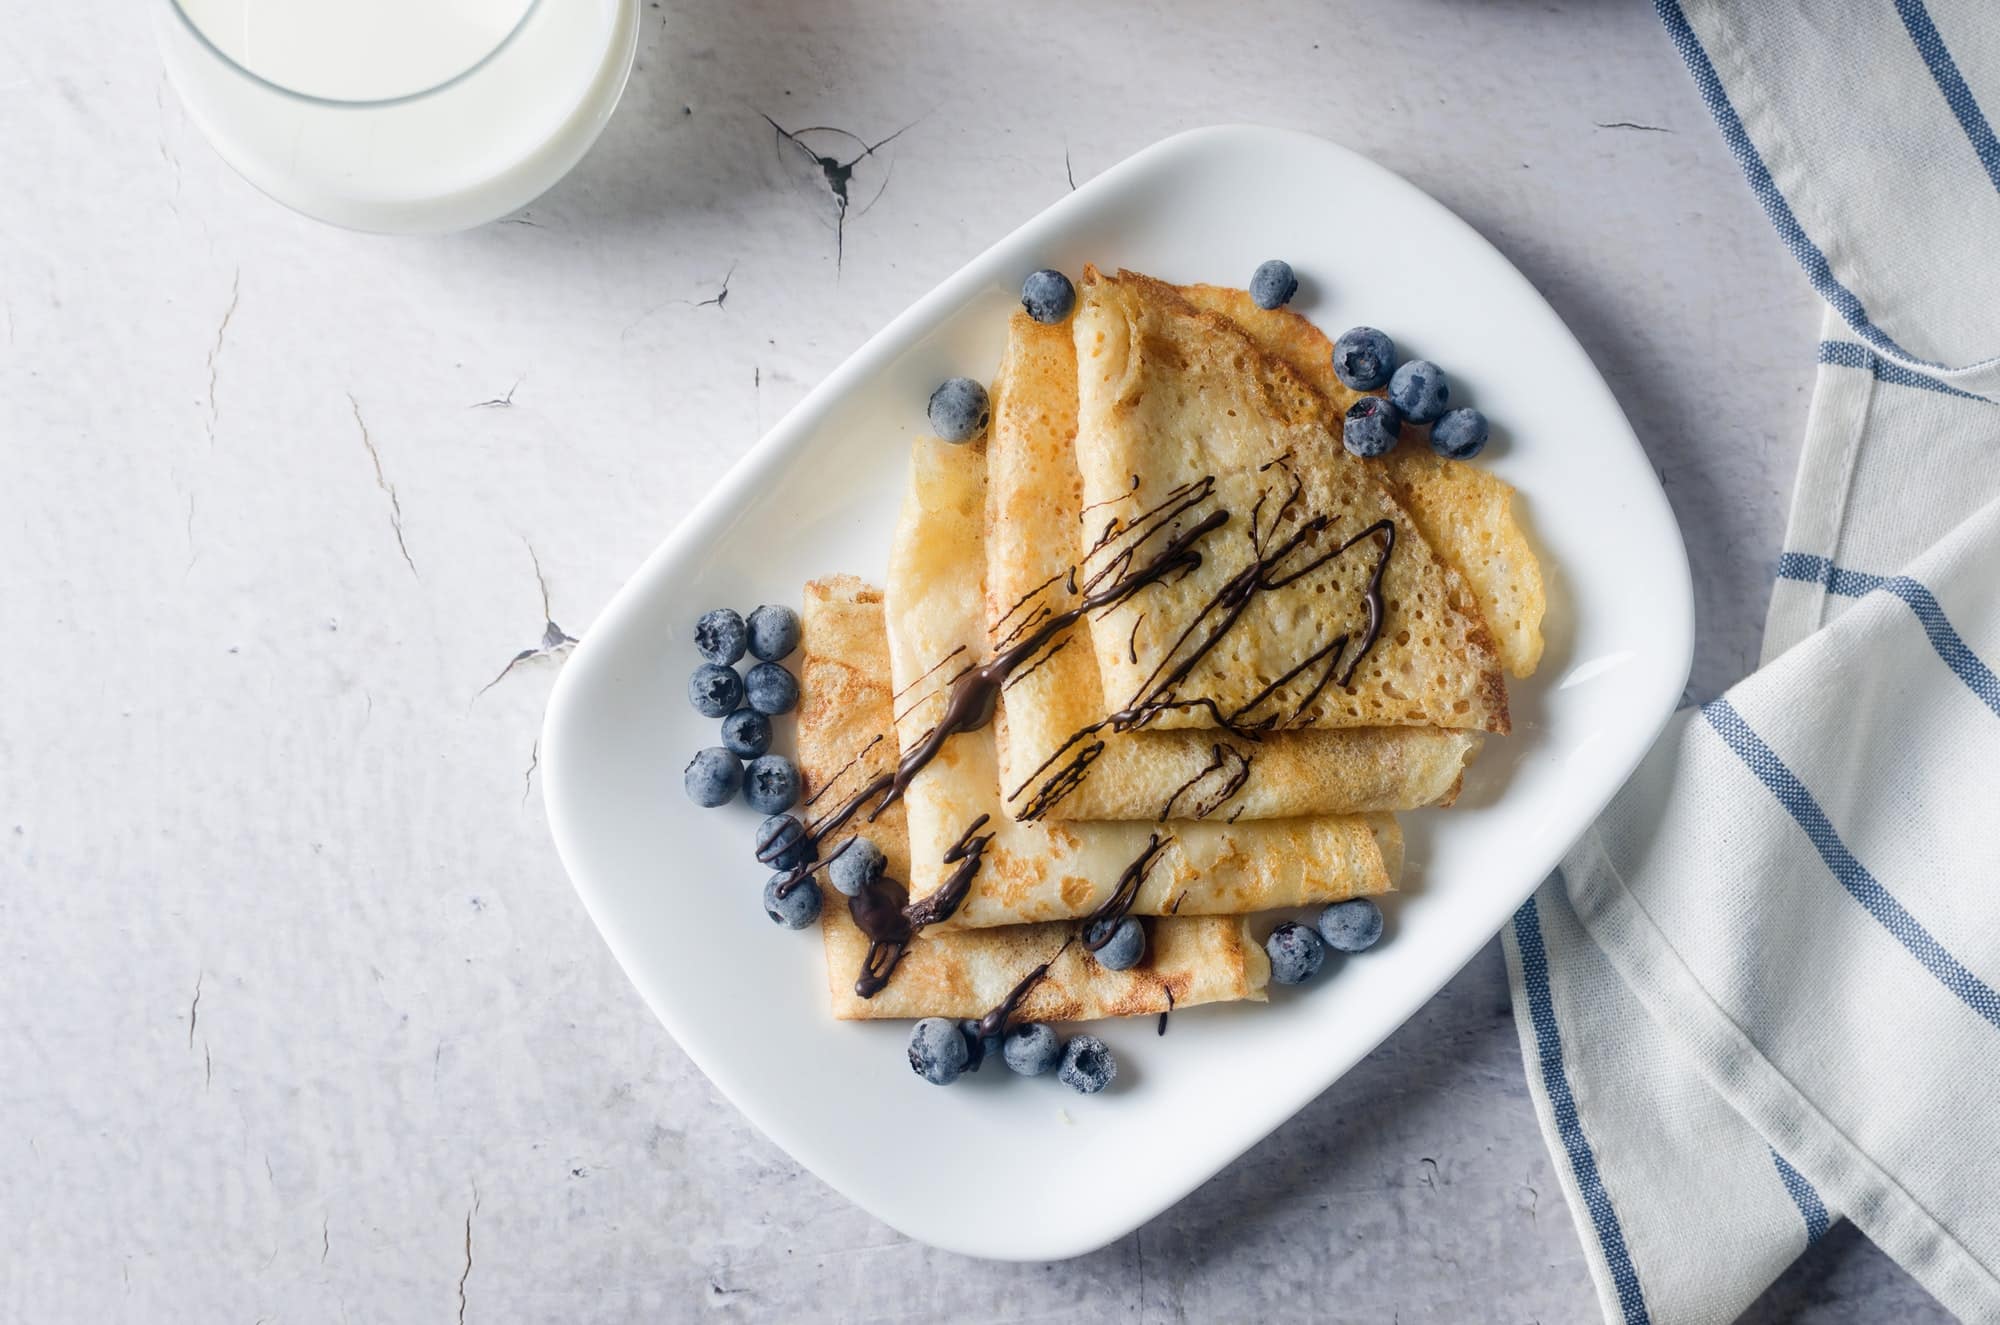 Naleśniki, which are thin homemade pancakes with berries, traditional Polish cuisine.